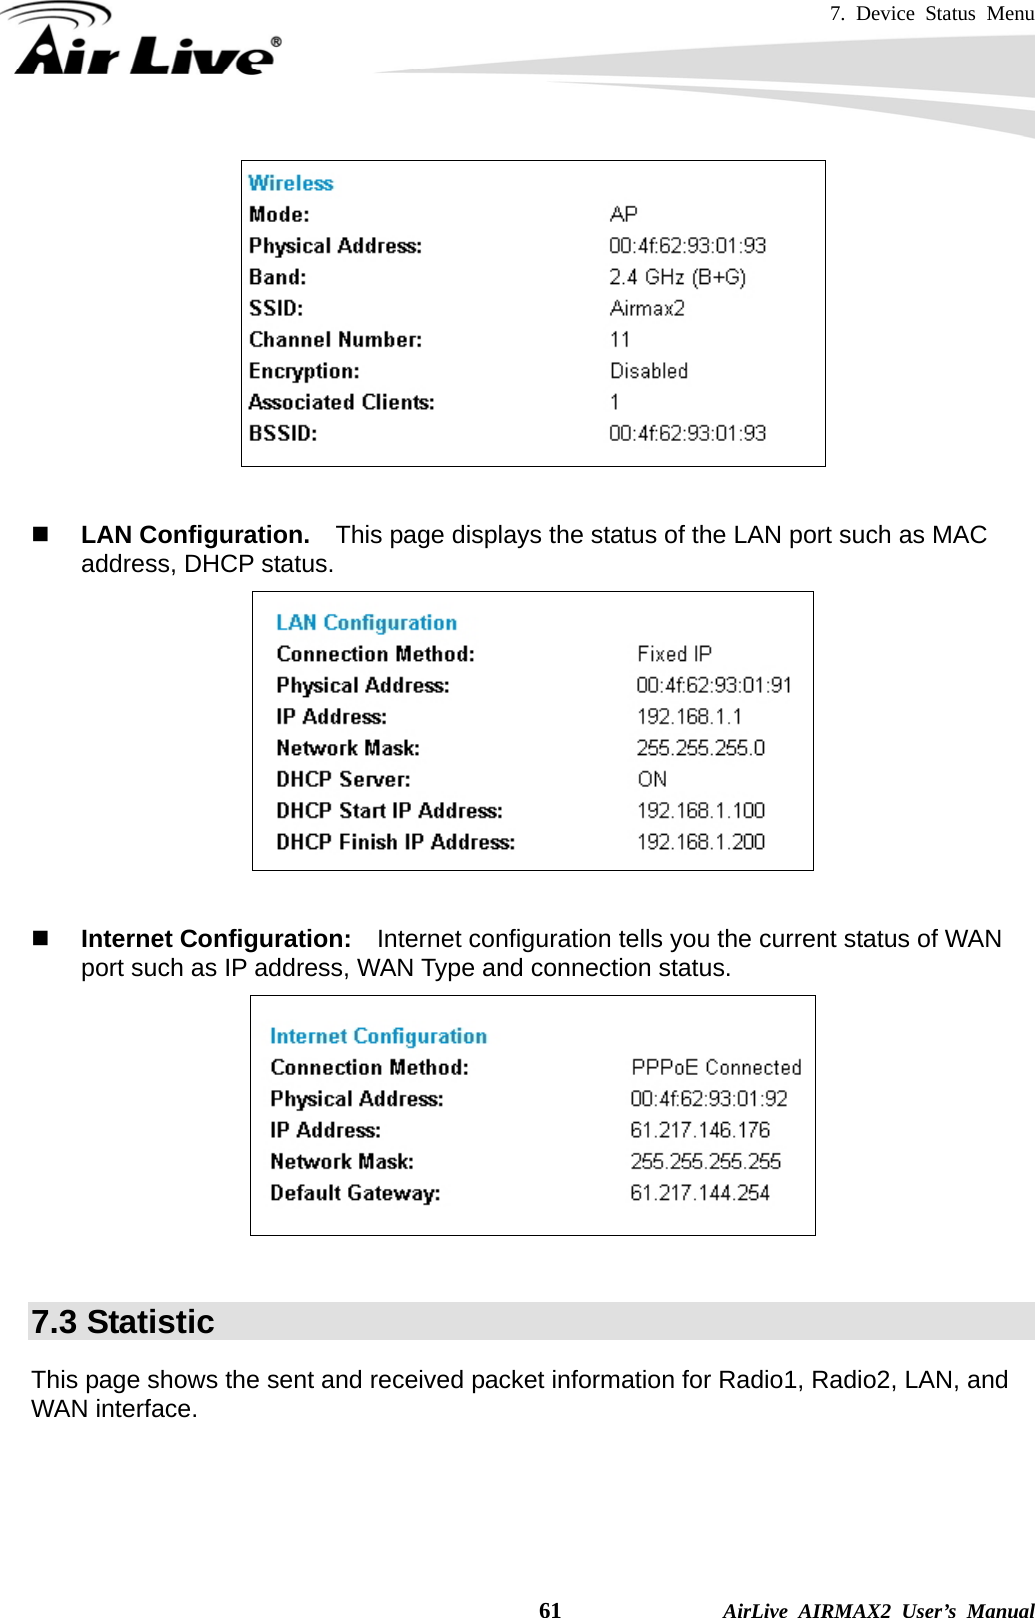 7. Device Status Menu    61              AirLive AIRMAX2 User’s Manual    LAN Configuration.    This page displays the status of the LAN port such as MAC address, DHCP status.    Internet Configuration:    Internet configuration tells you the current status of WAN port such as IP address, WAN Type and connection status.   7.3 Statistic This page shows the sent and received packet information for Radio1, Radio2, LAN, and WAN interface.    